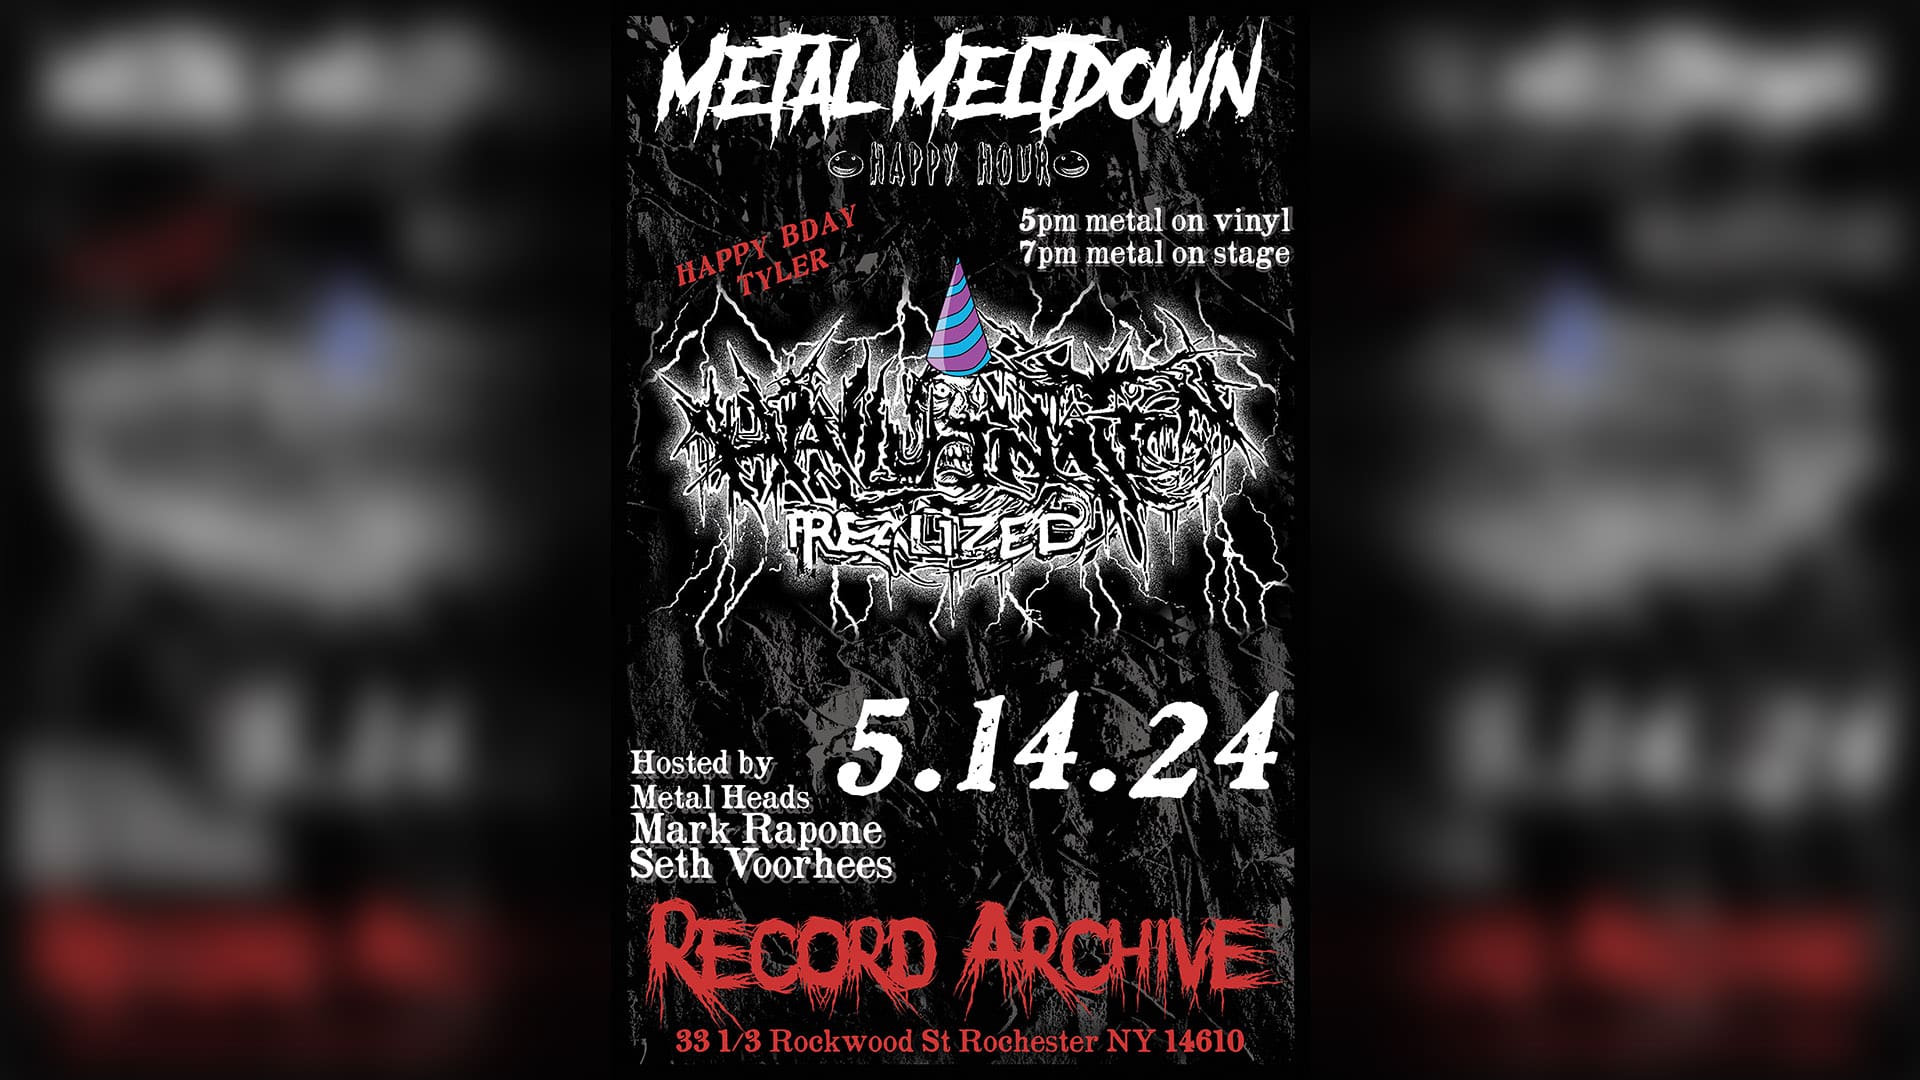 Metal Meltdown Happy Hour Happy Bday Tyler. 5pm metal on vinyl. 7pm metal on stage. Hallucination Realized. Hosted by Metalheads Mark Rapone and Seth Voorhees. 5.14.24. Record Archive 33 1/3 Rockwood St Rochester NY 14610